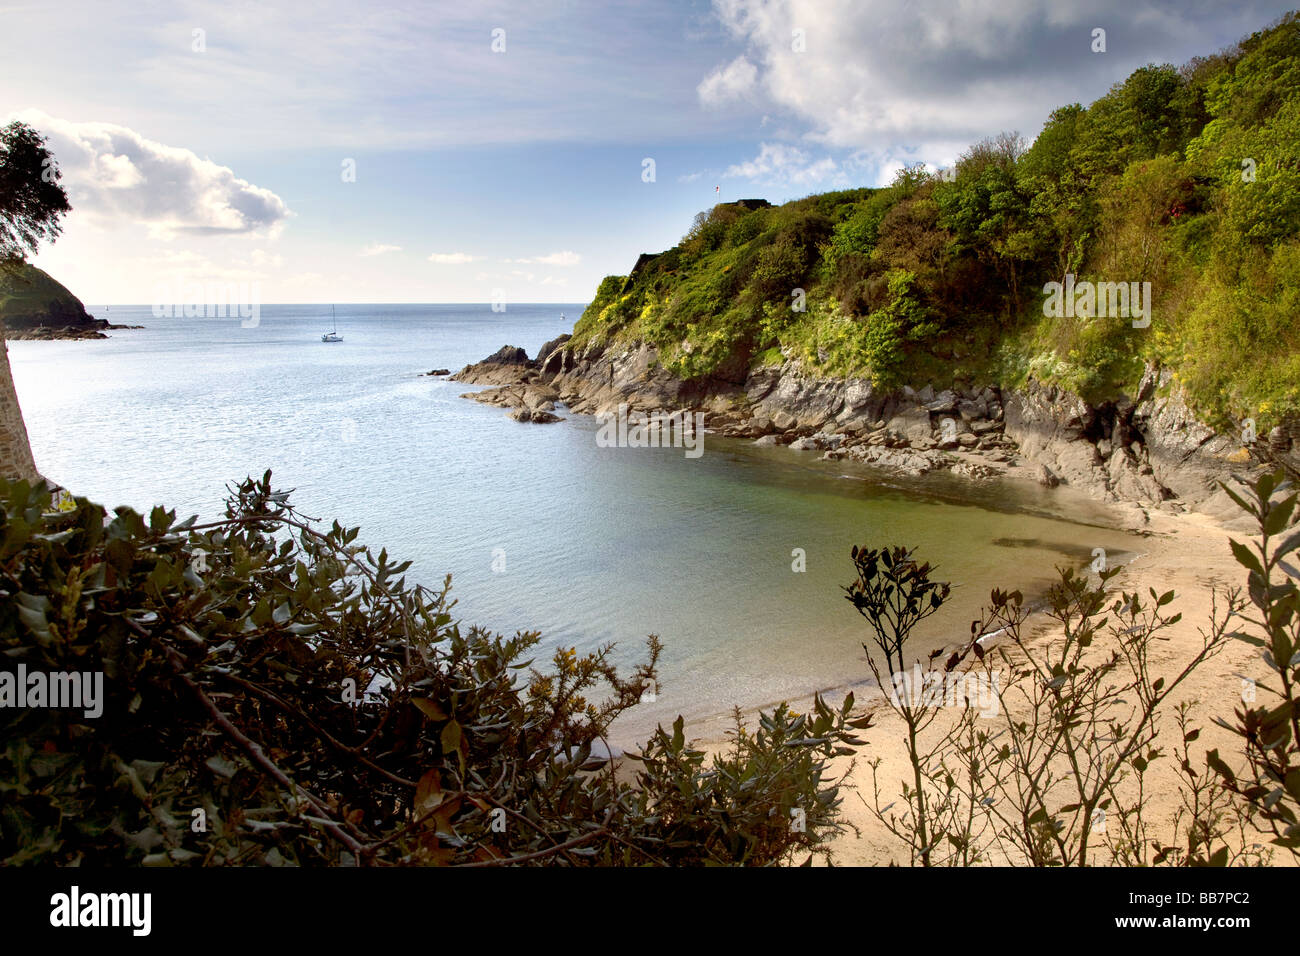 Readymoney Cove, inspiration and home for novelist Daphne du Maurier, Cornwall, UK Stock Photo